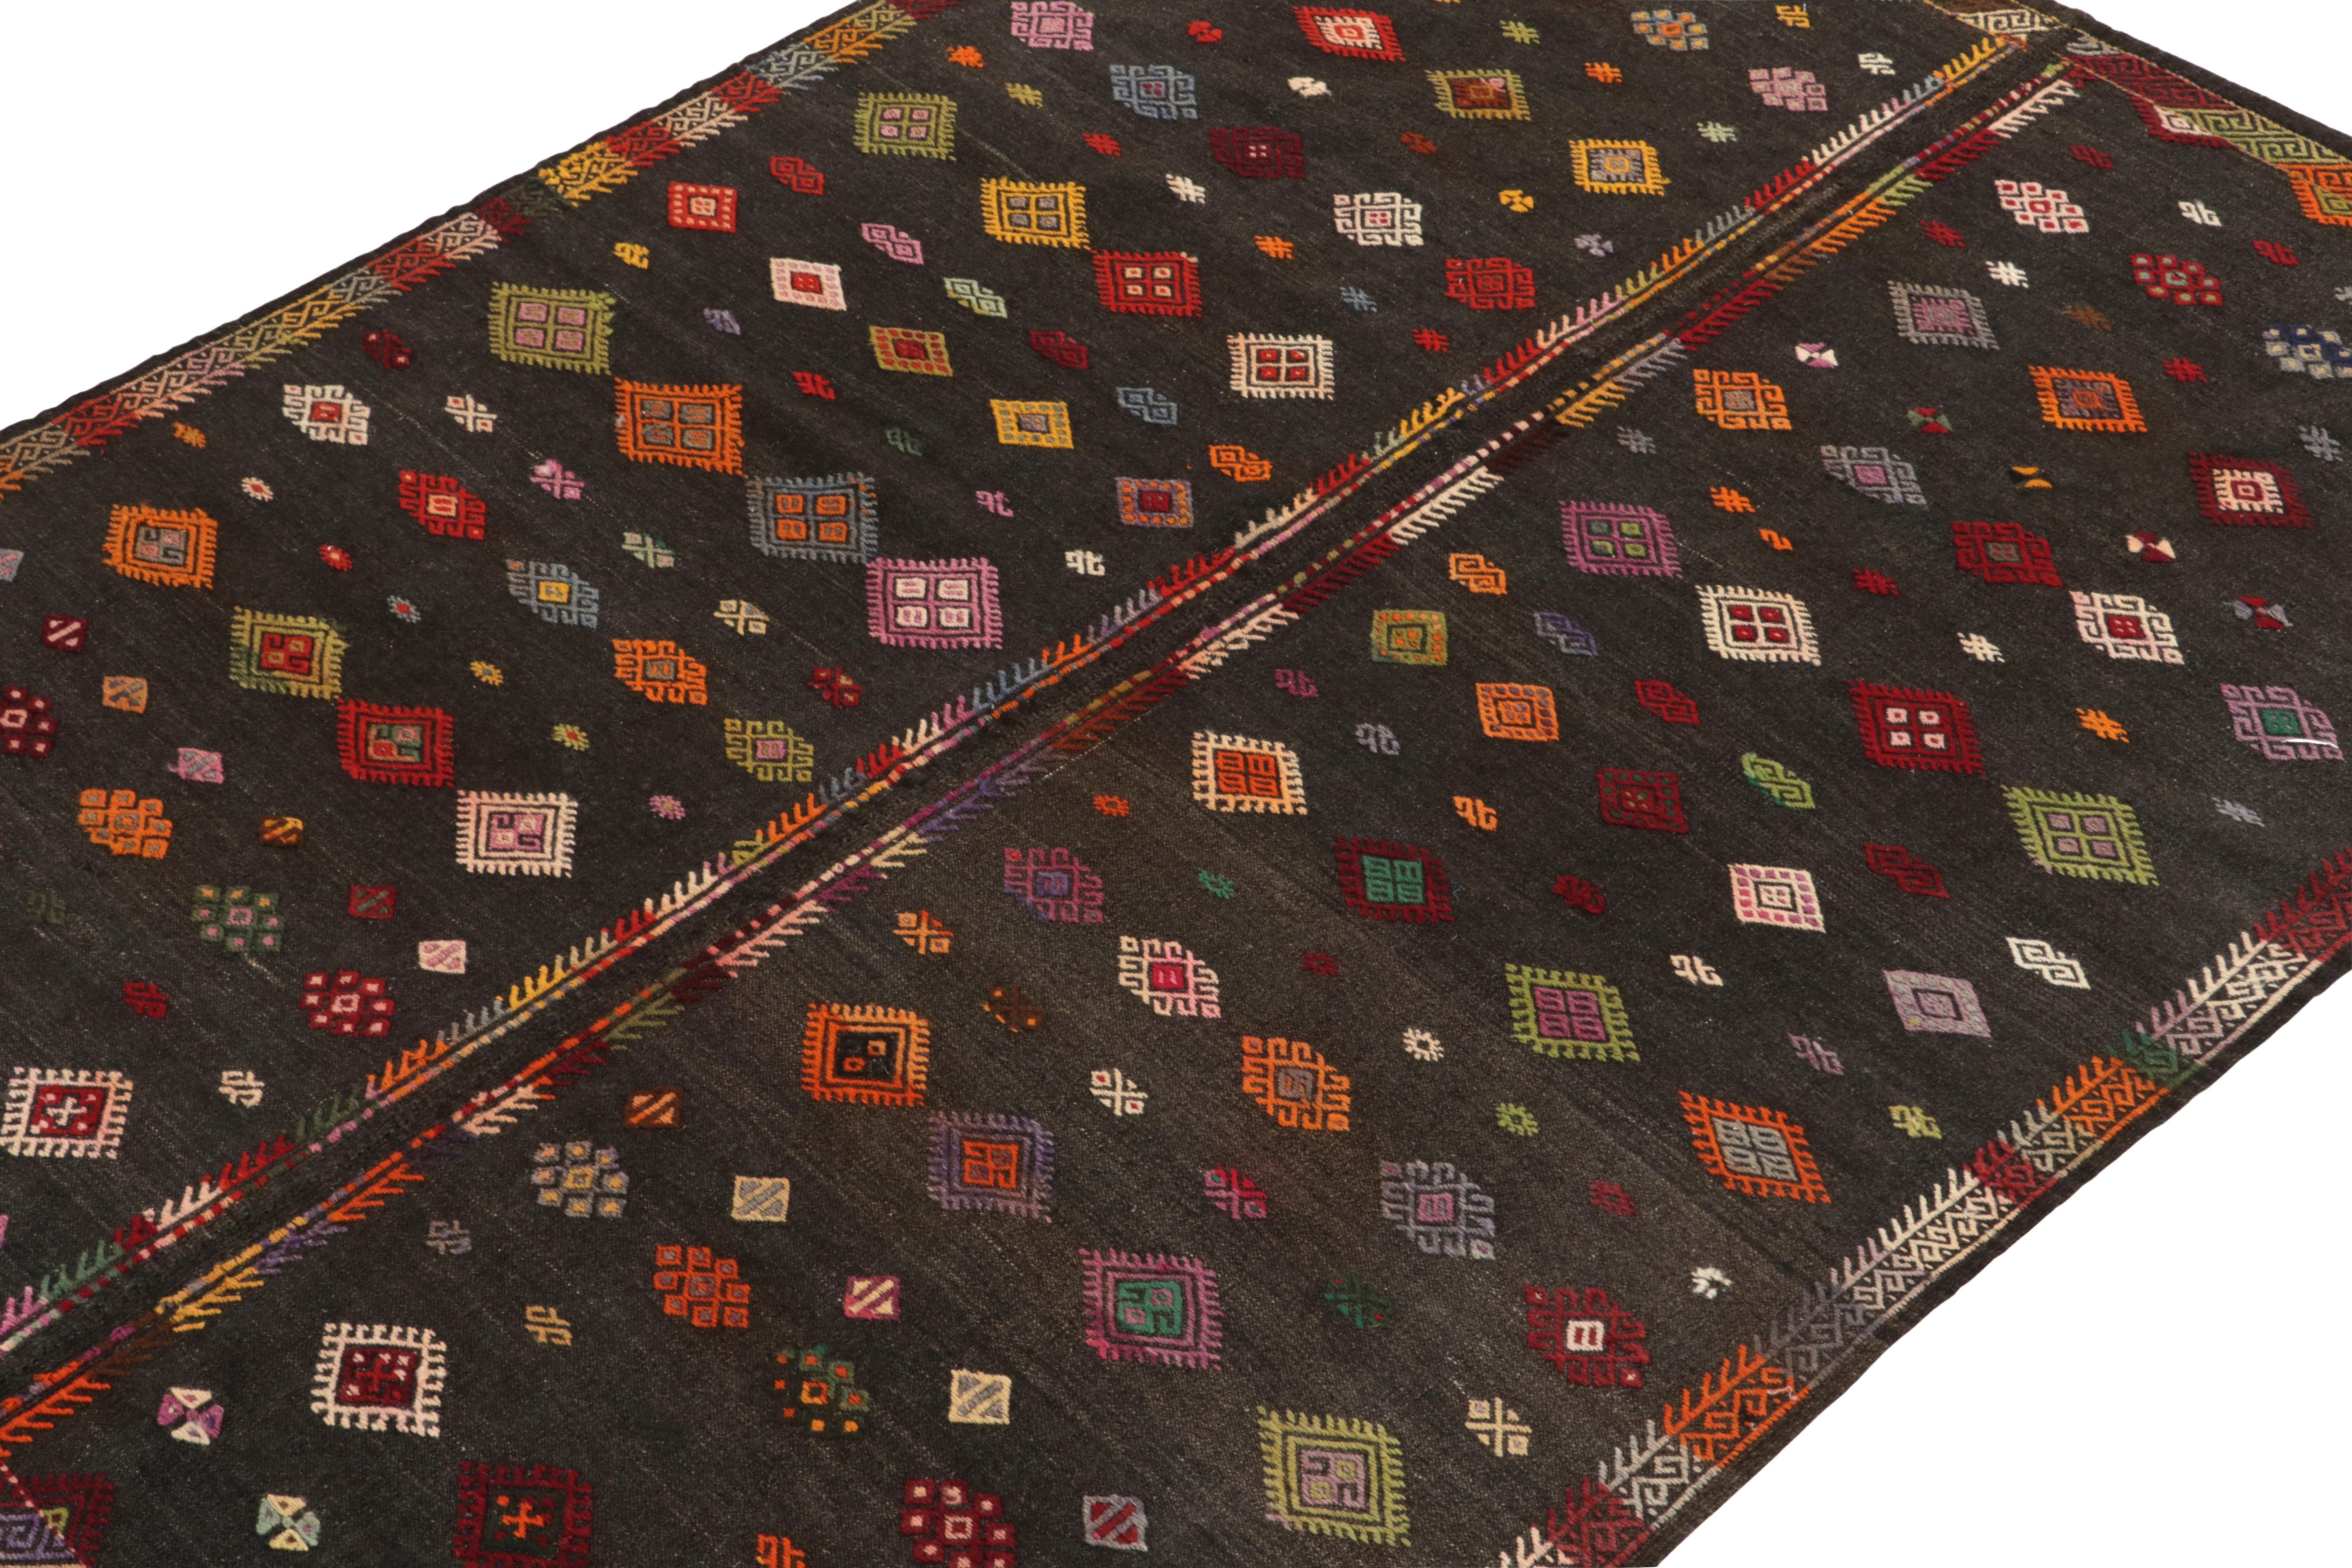 Hand-Knotted 1950s Vintage Kilim Rug in Gray-Brown, Multicolor Geometric Patterns